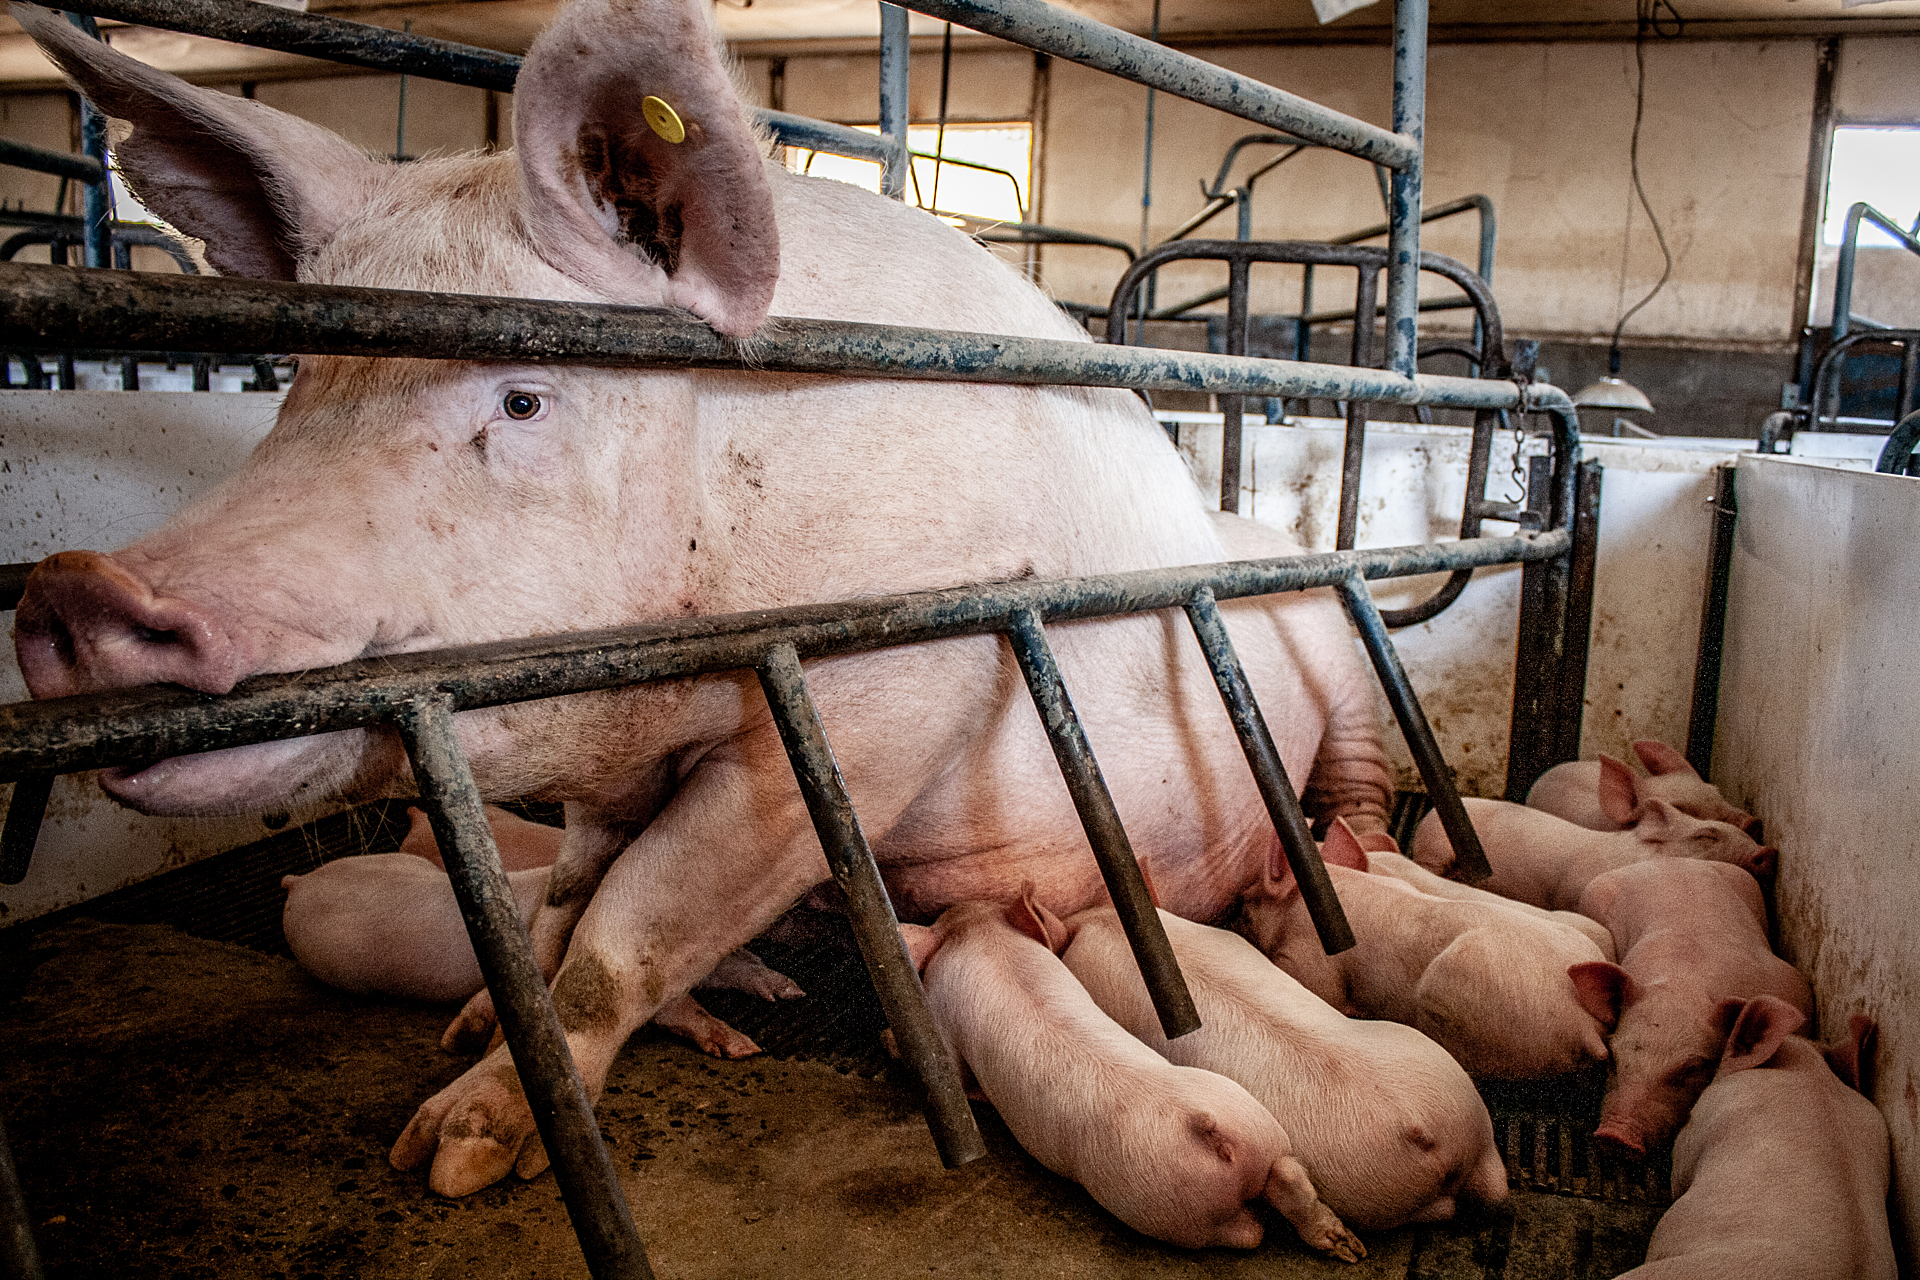 A sow sits up in a narrow farrowing crate at an industrial pig farm while her piglets nurse.